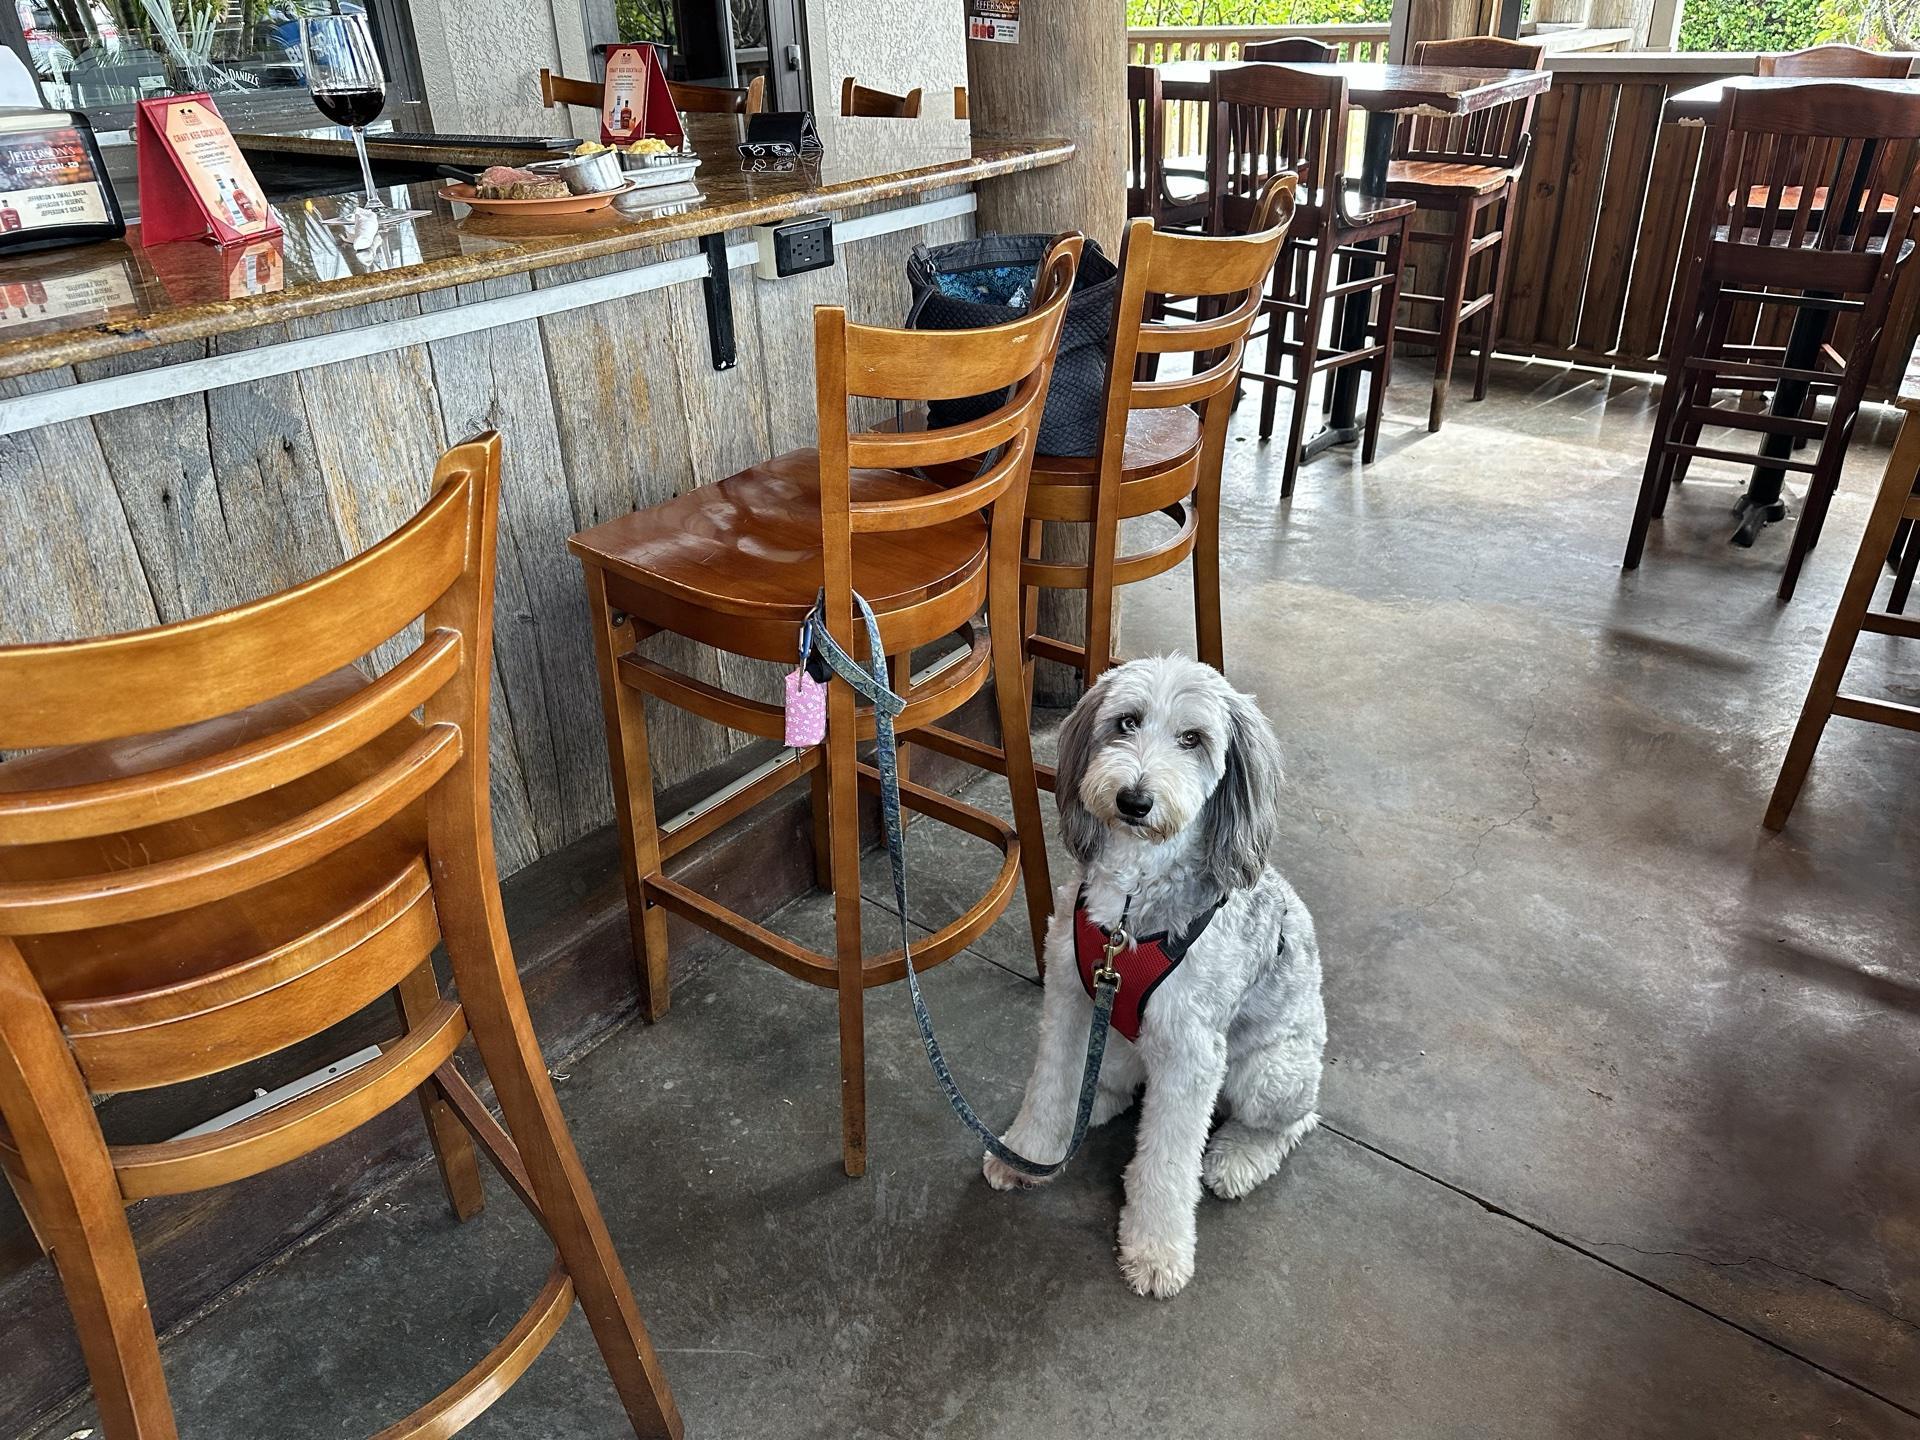 Pet Friendly Charlie and Jake's Barbeque